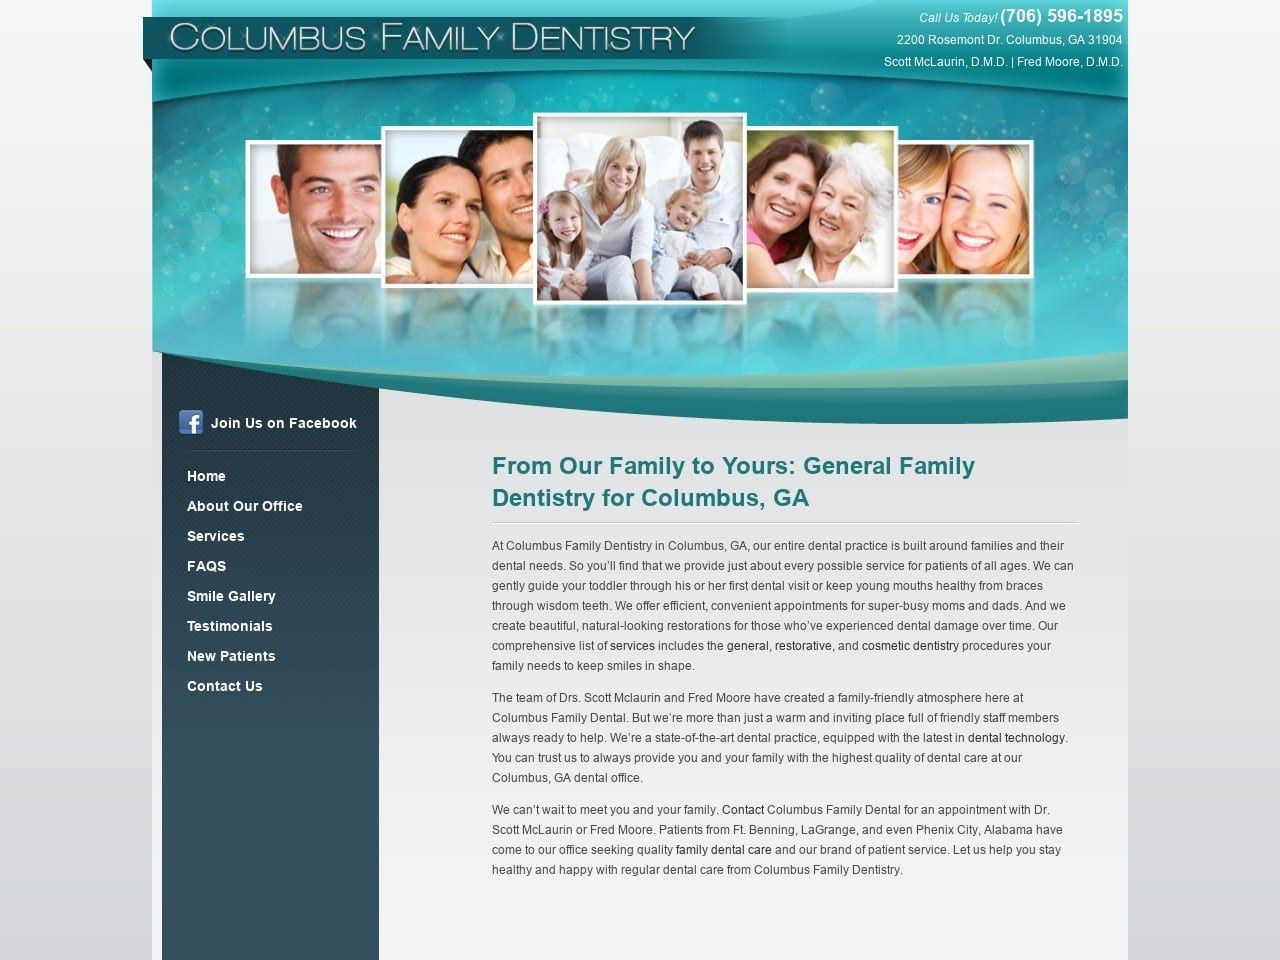 McLaurin Family Dentistry Website Screenshot from columbusfamilydentistry.com